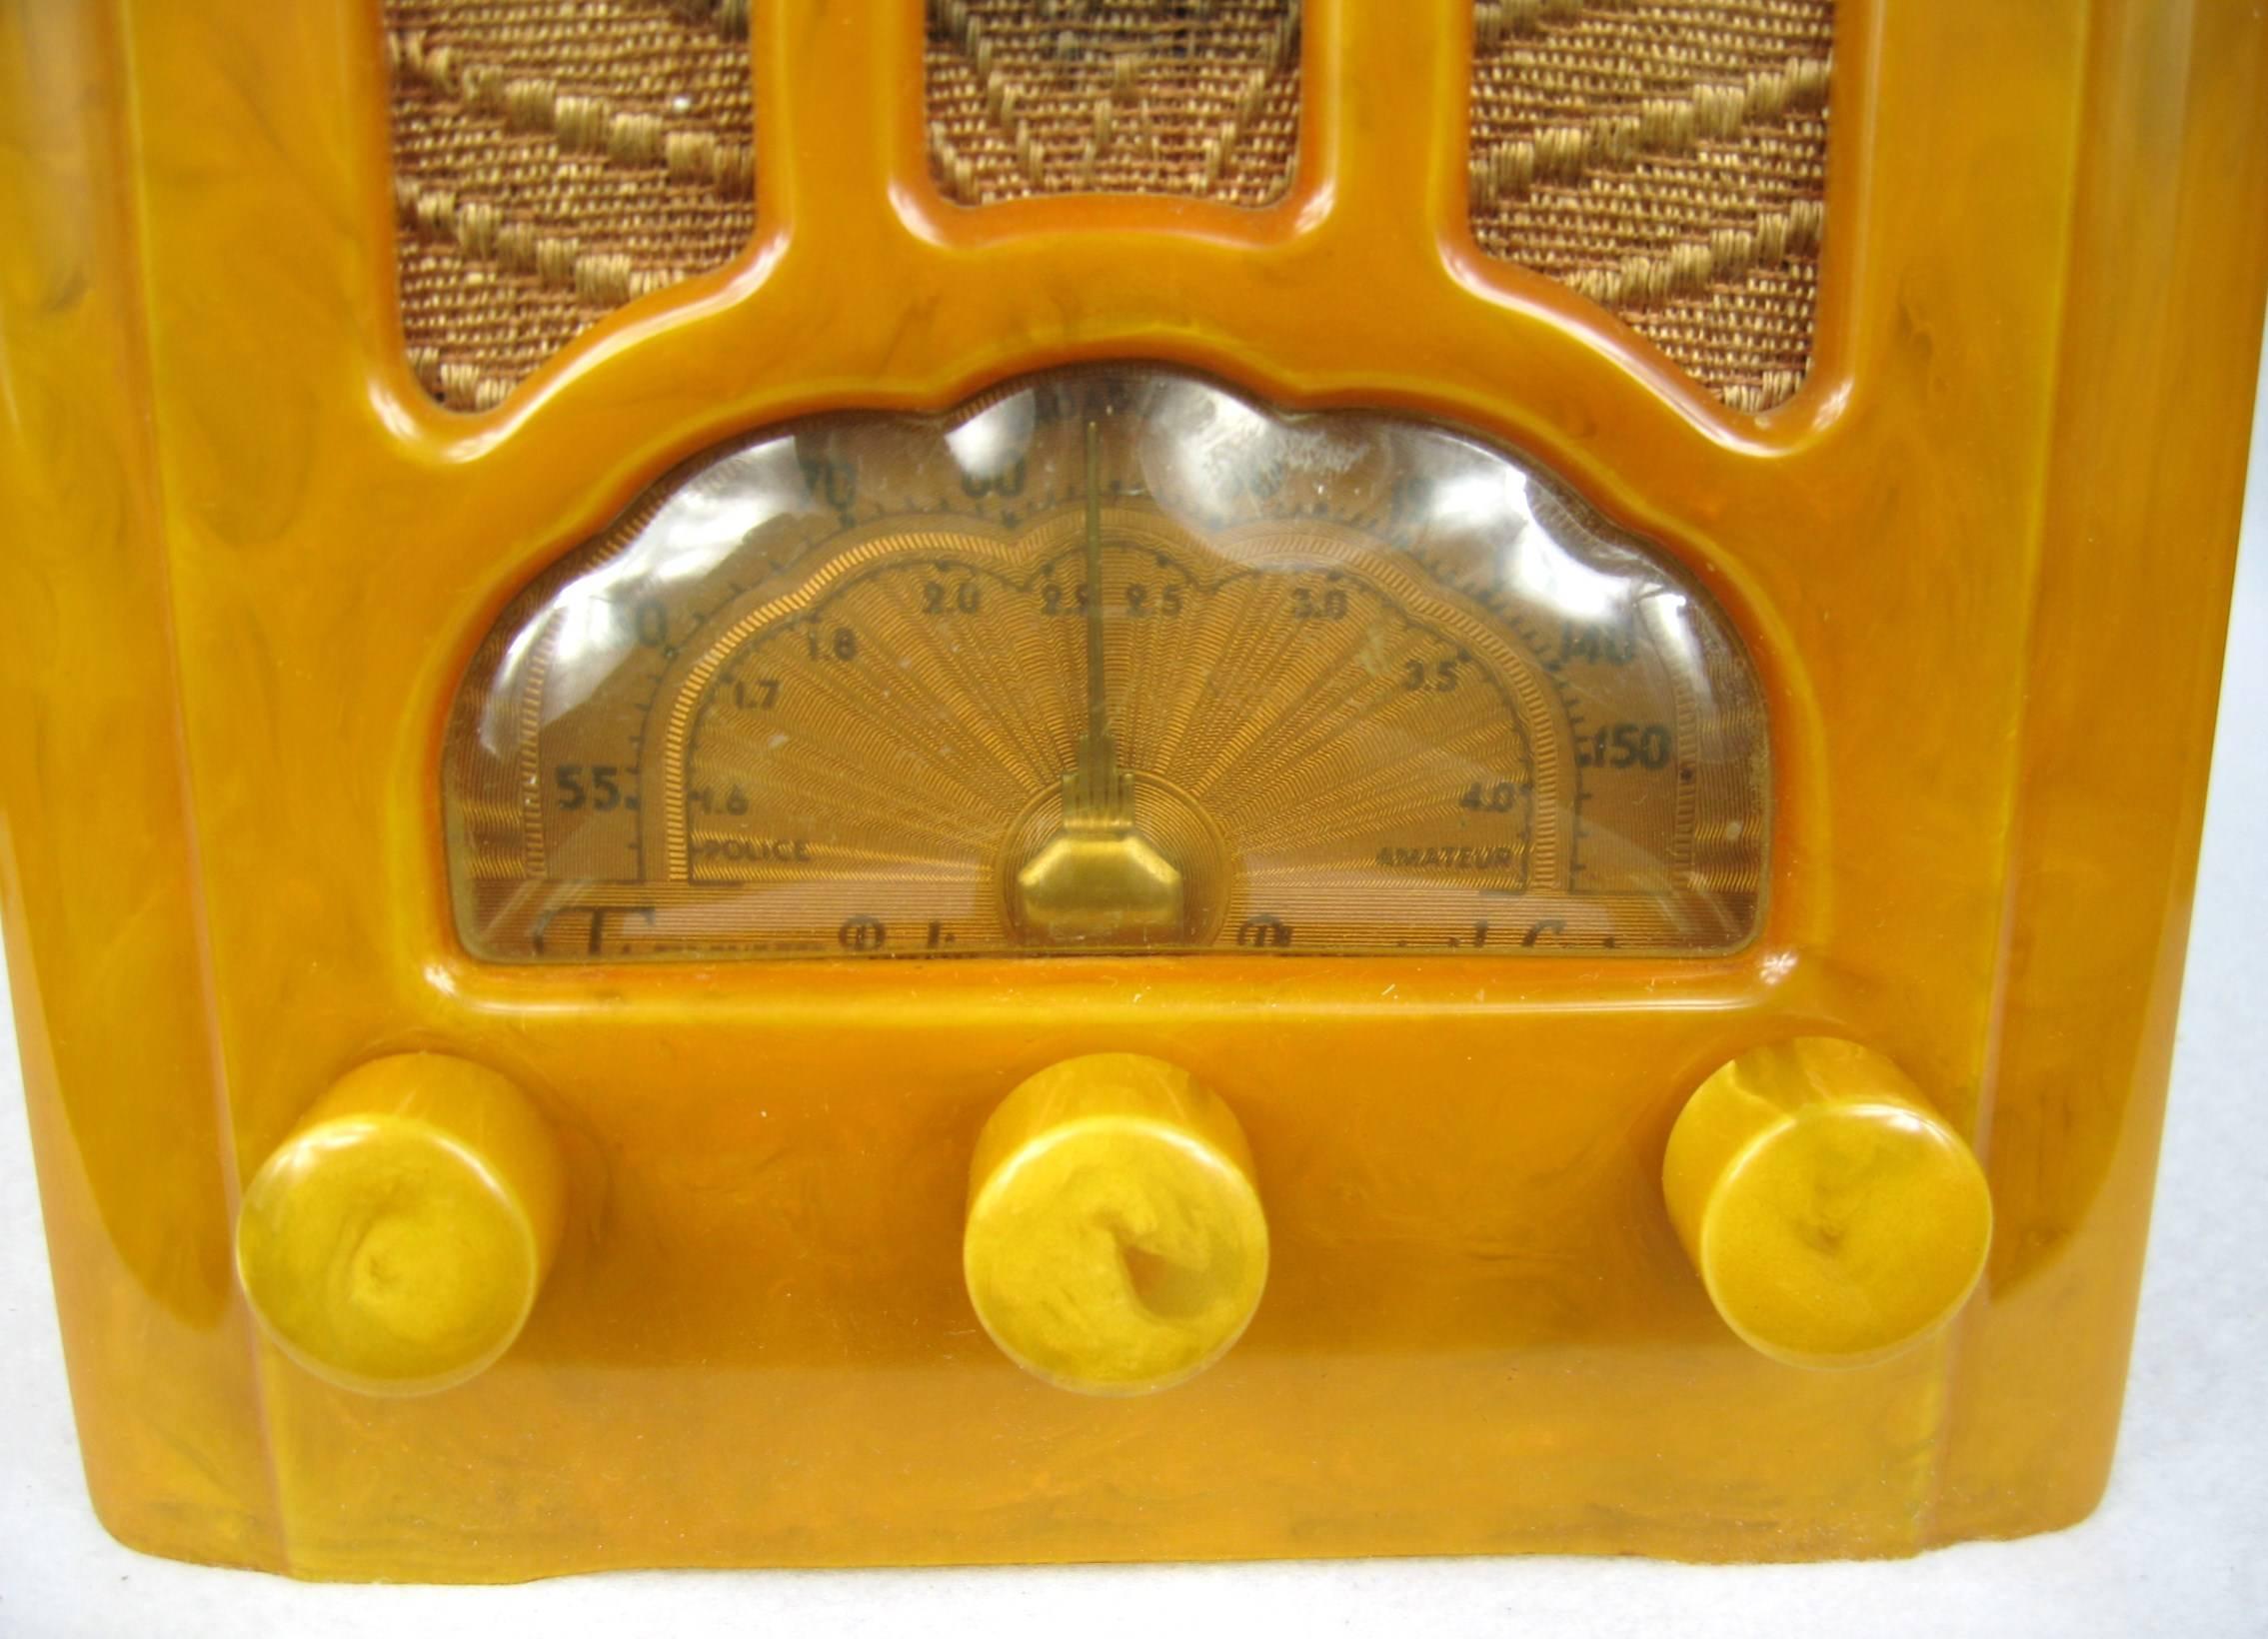 1937 yellow Emerson AU-190 cathedral catalin / Bakelite tube radio.
Yellow case with yellow knobs. This radio is very rare to find it in this condition.
The radio is original and in excellent condition, no cracks, no chips, no breaks, no repairs